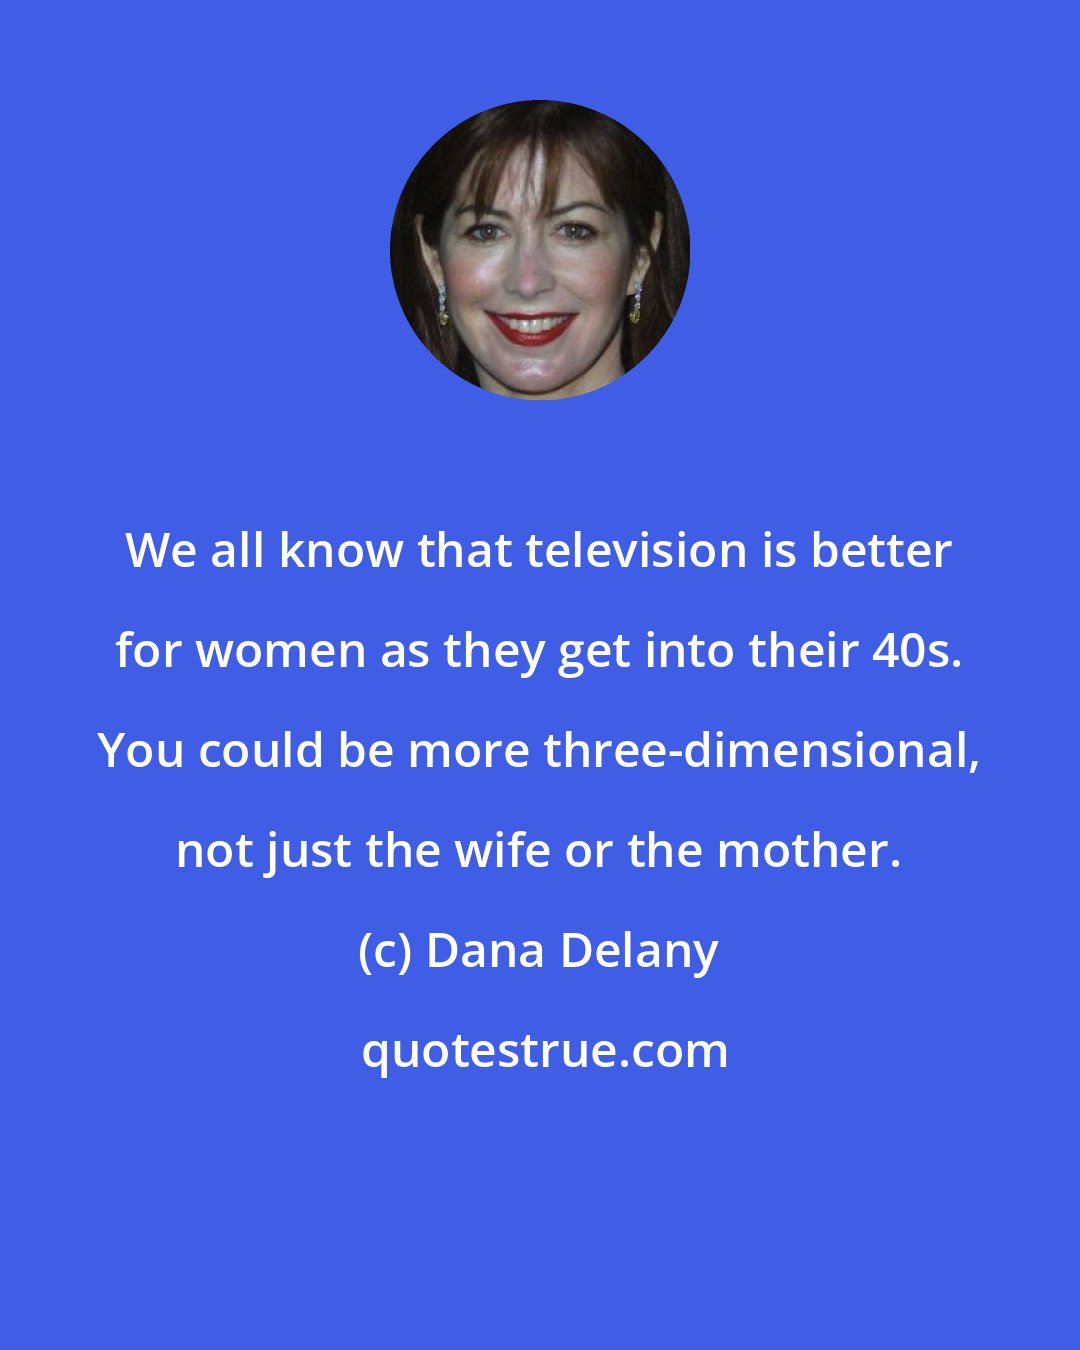 Dana Delany: We all know that television is better for women as they get into their 40s. You could be more three-dimensional, not just the wife or the mother.